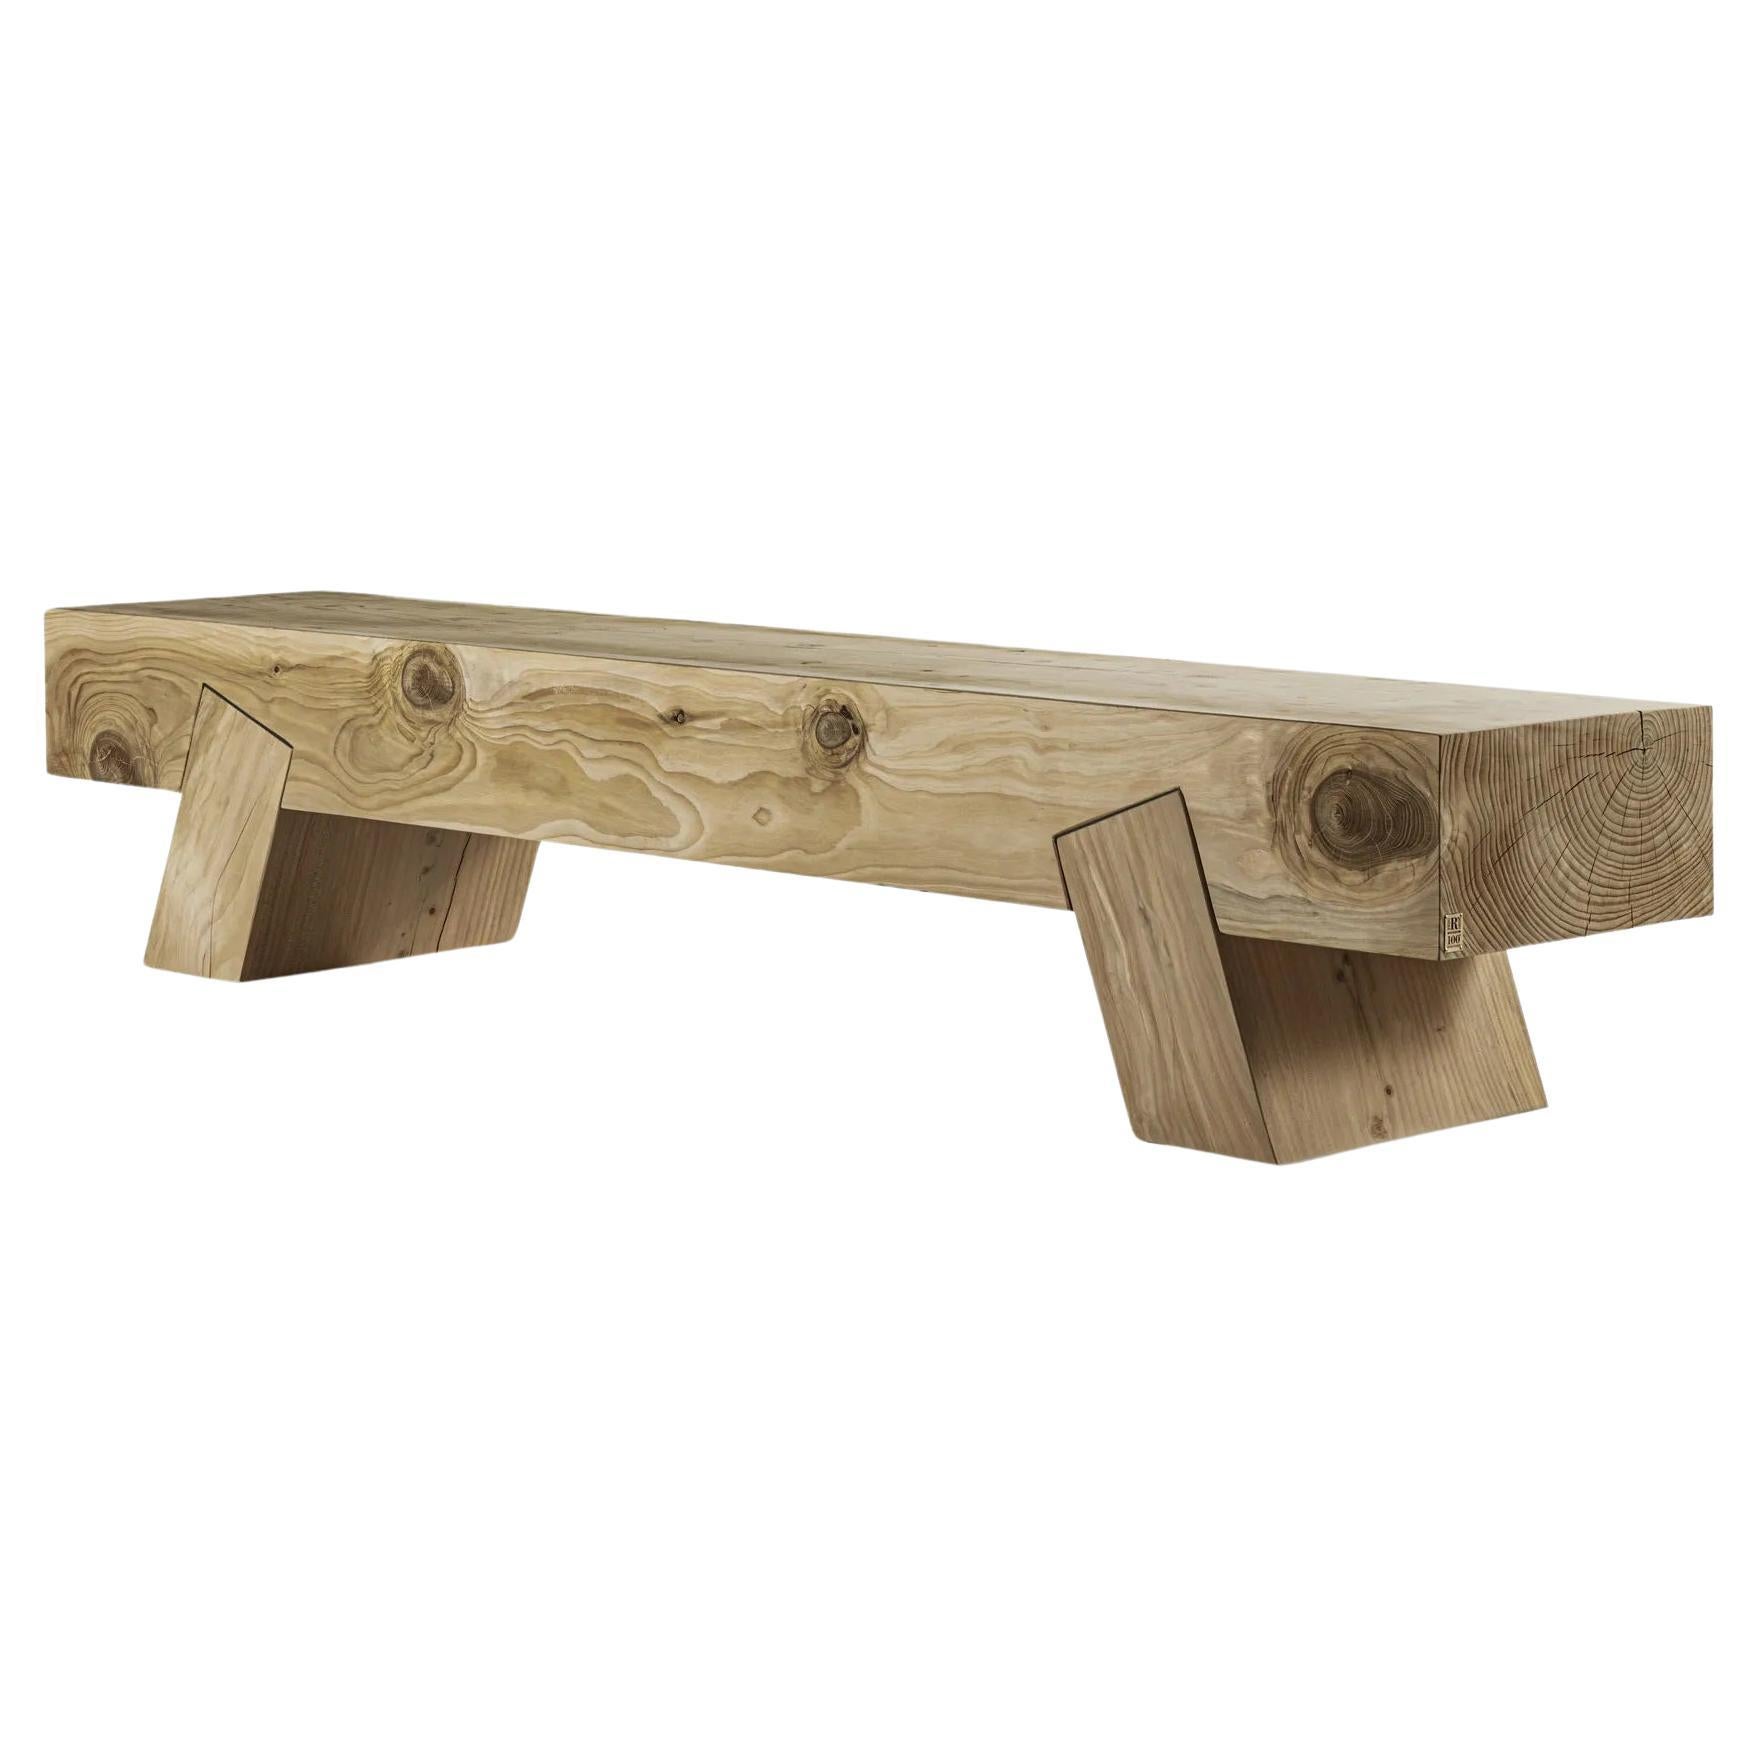 Outdoor Bench Crafted From Solid Block of Scented Cedar Wood For Sale